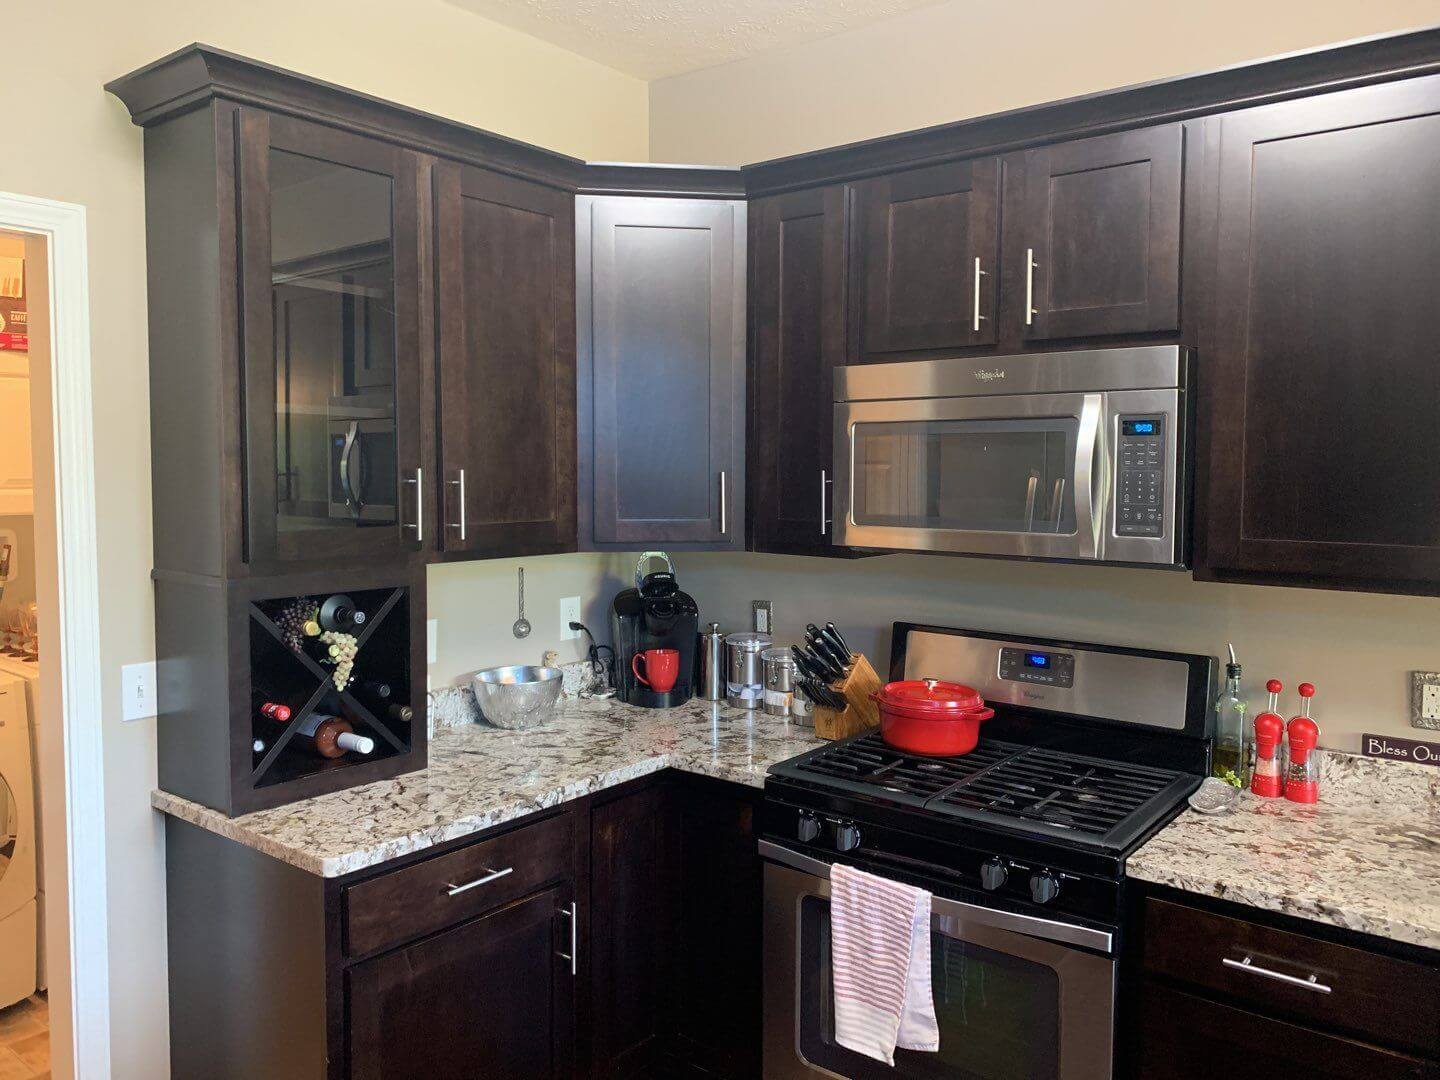 How To Restain Kitchen Cabinets A Darker Color | Cabinets ...